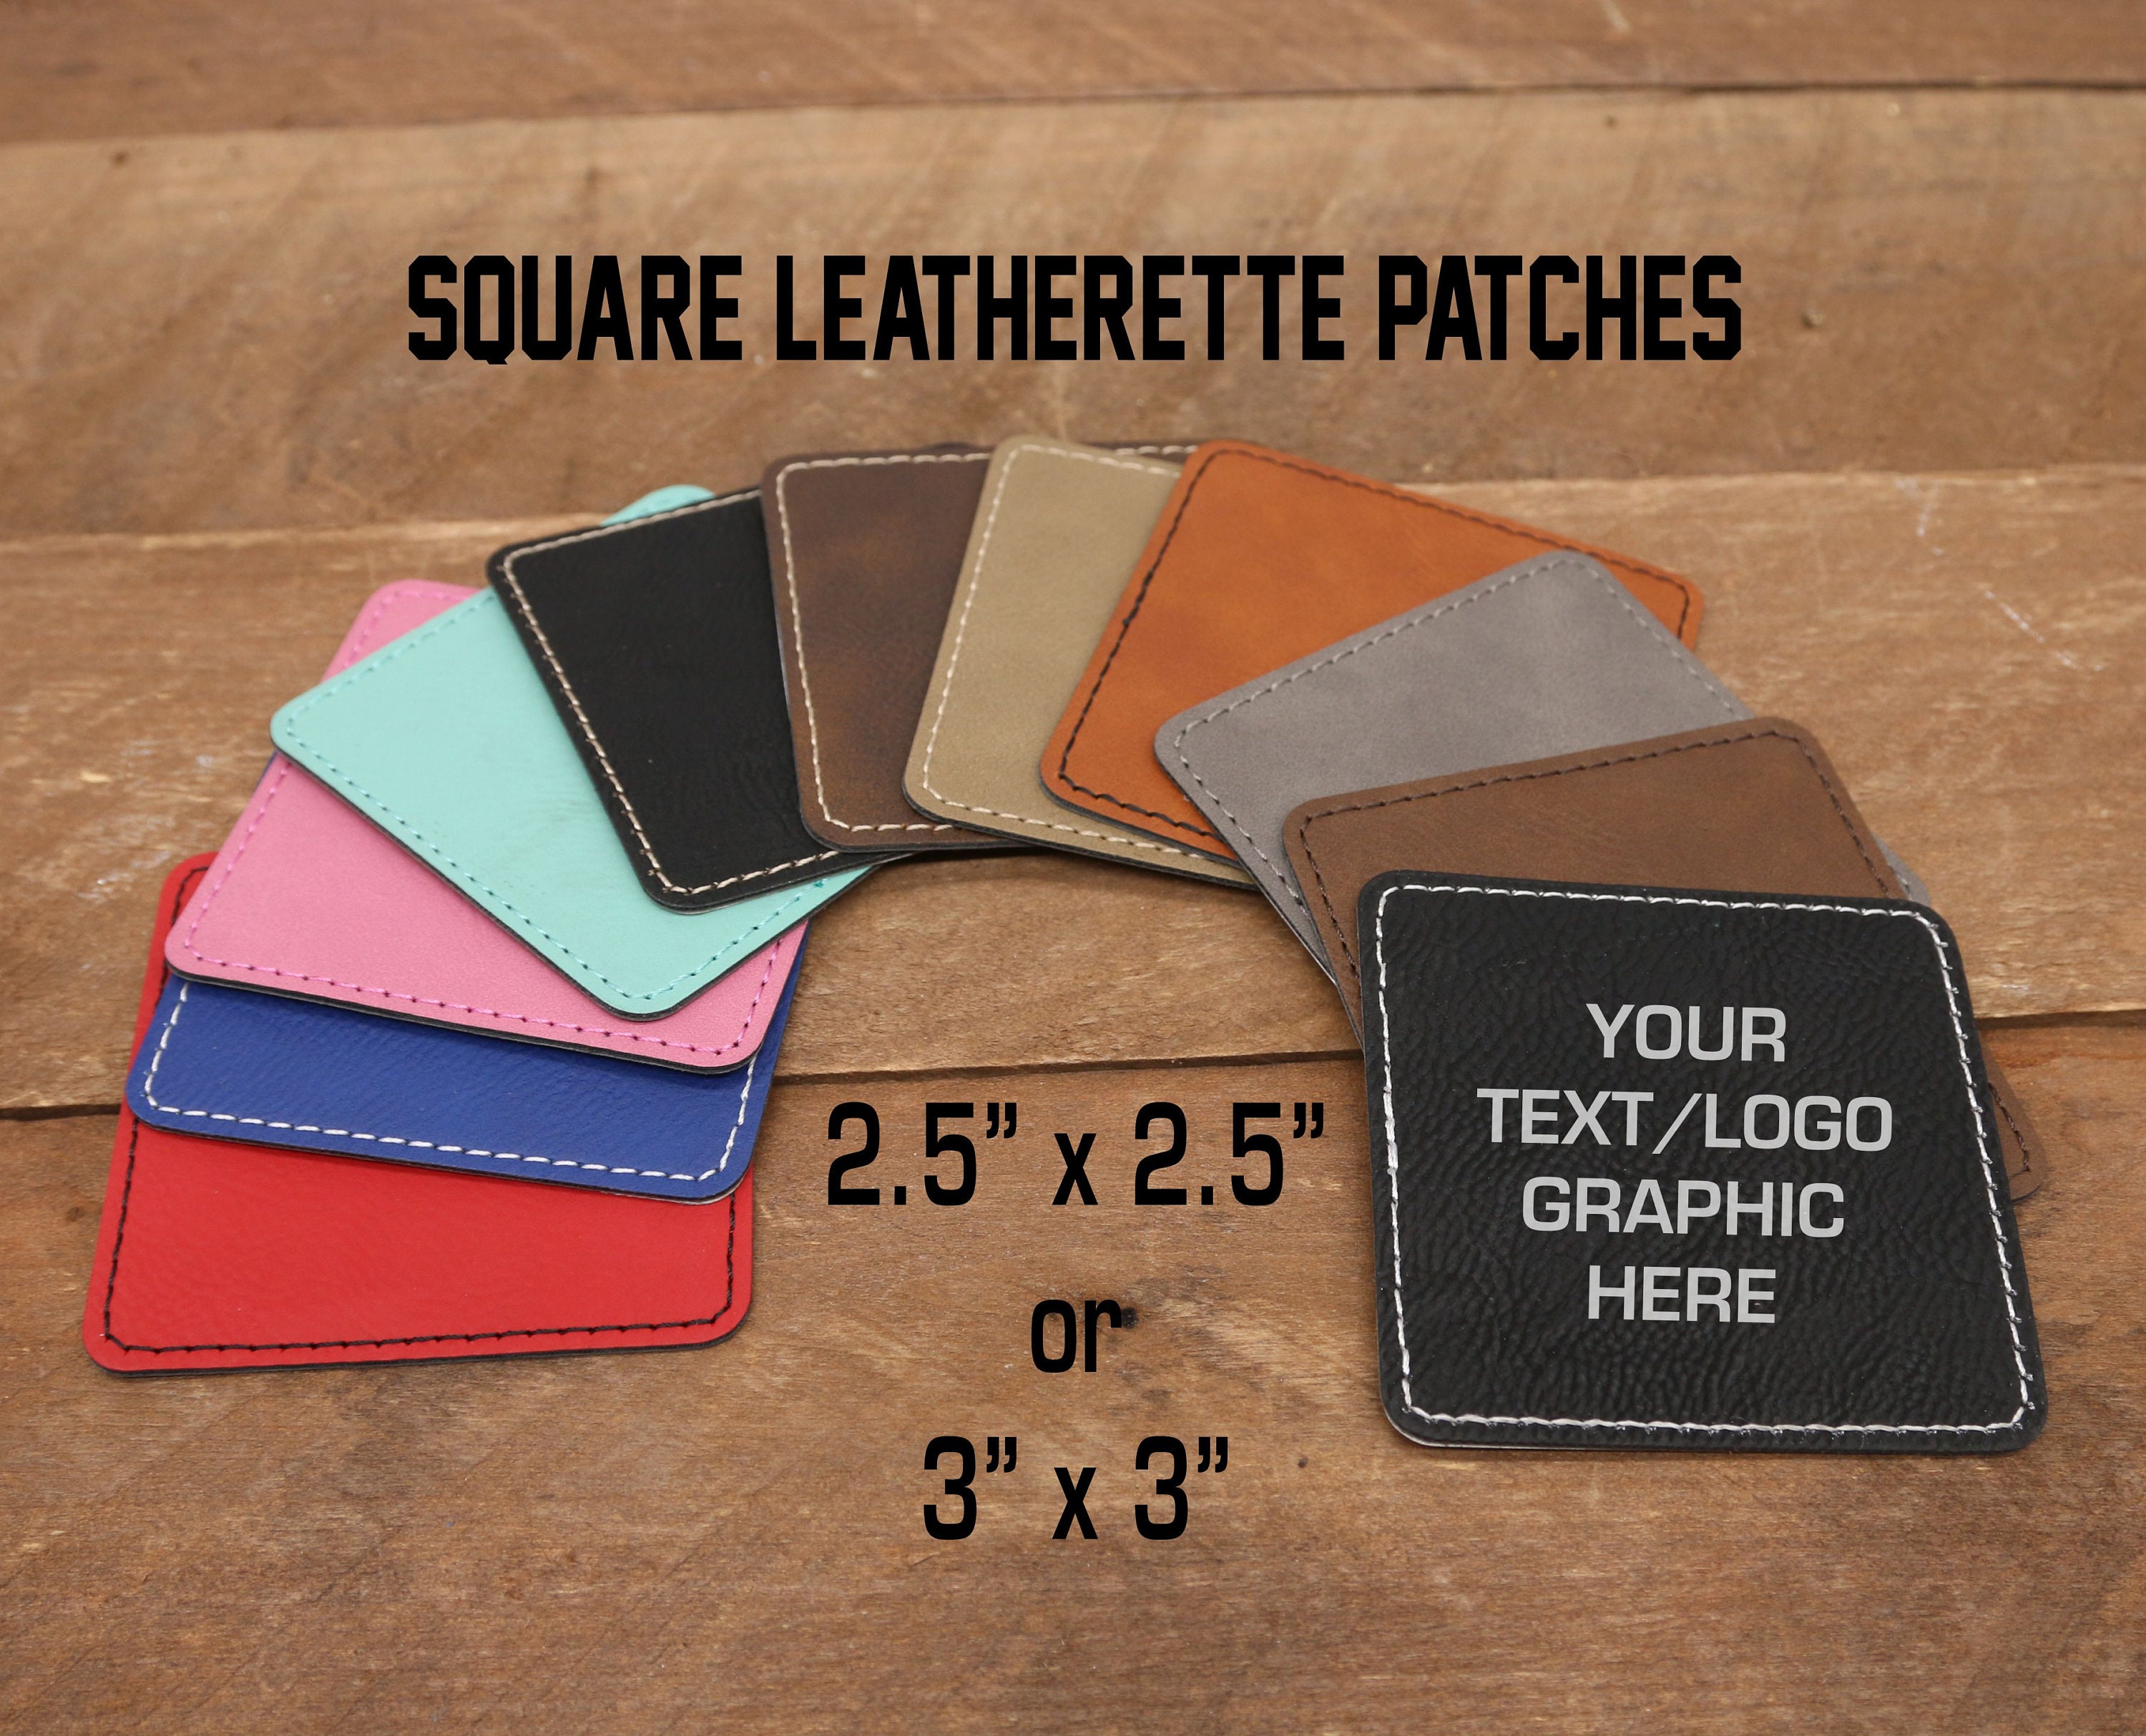 Blank Leatherette Patch Square 2.5x2.5 With Heat Adhesive, Blank